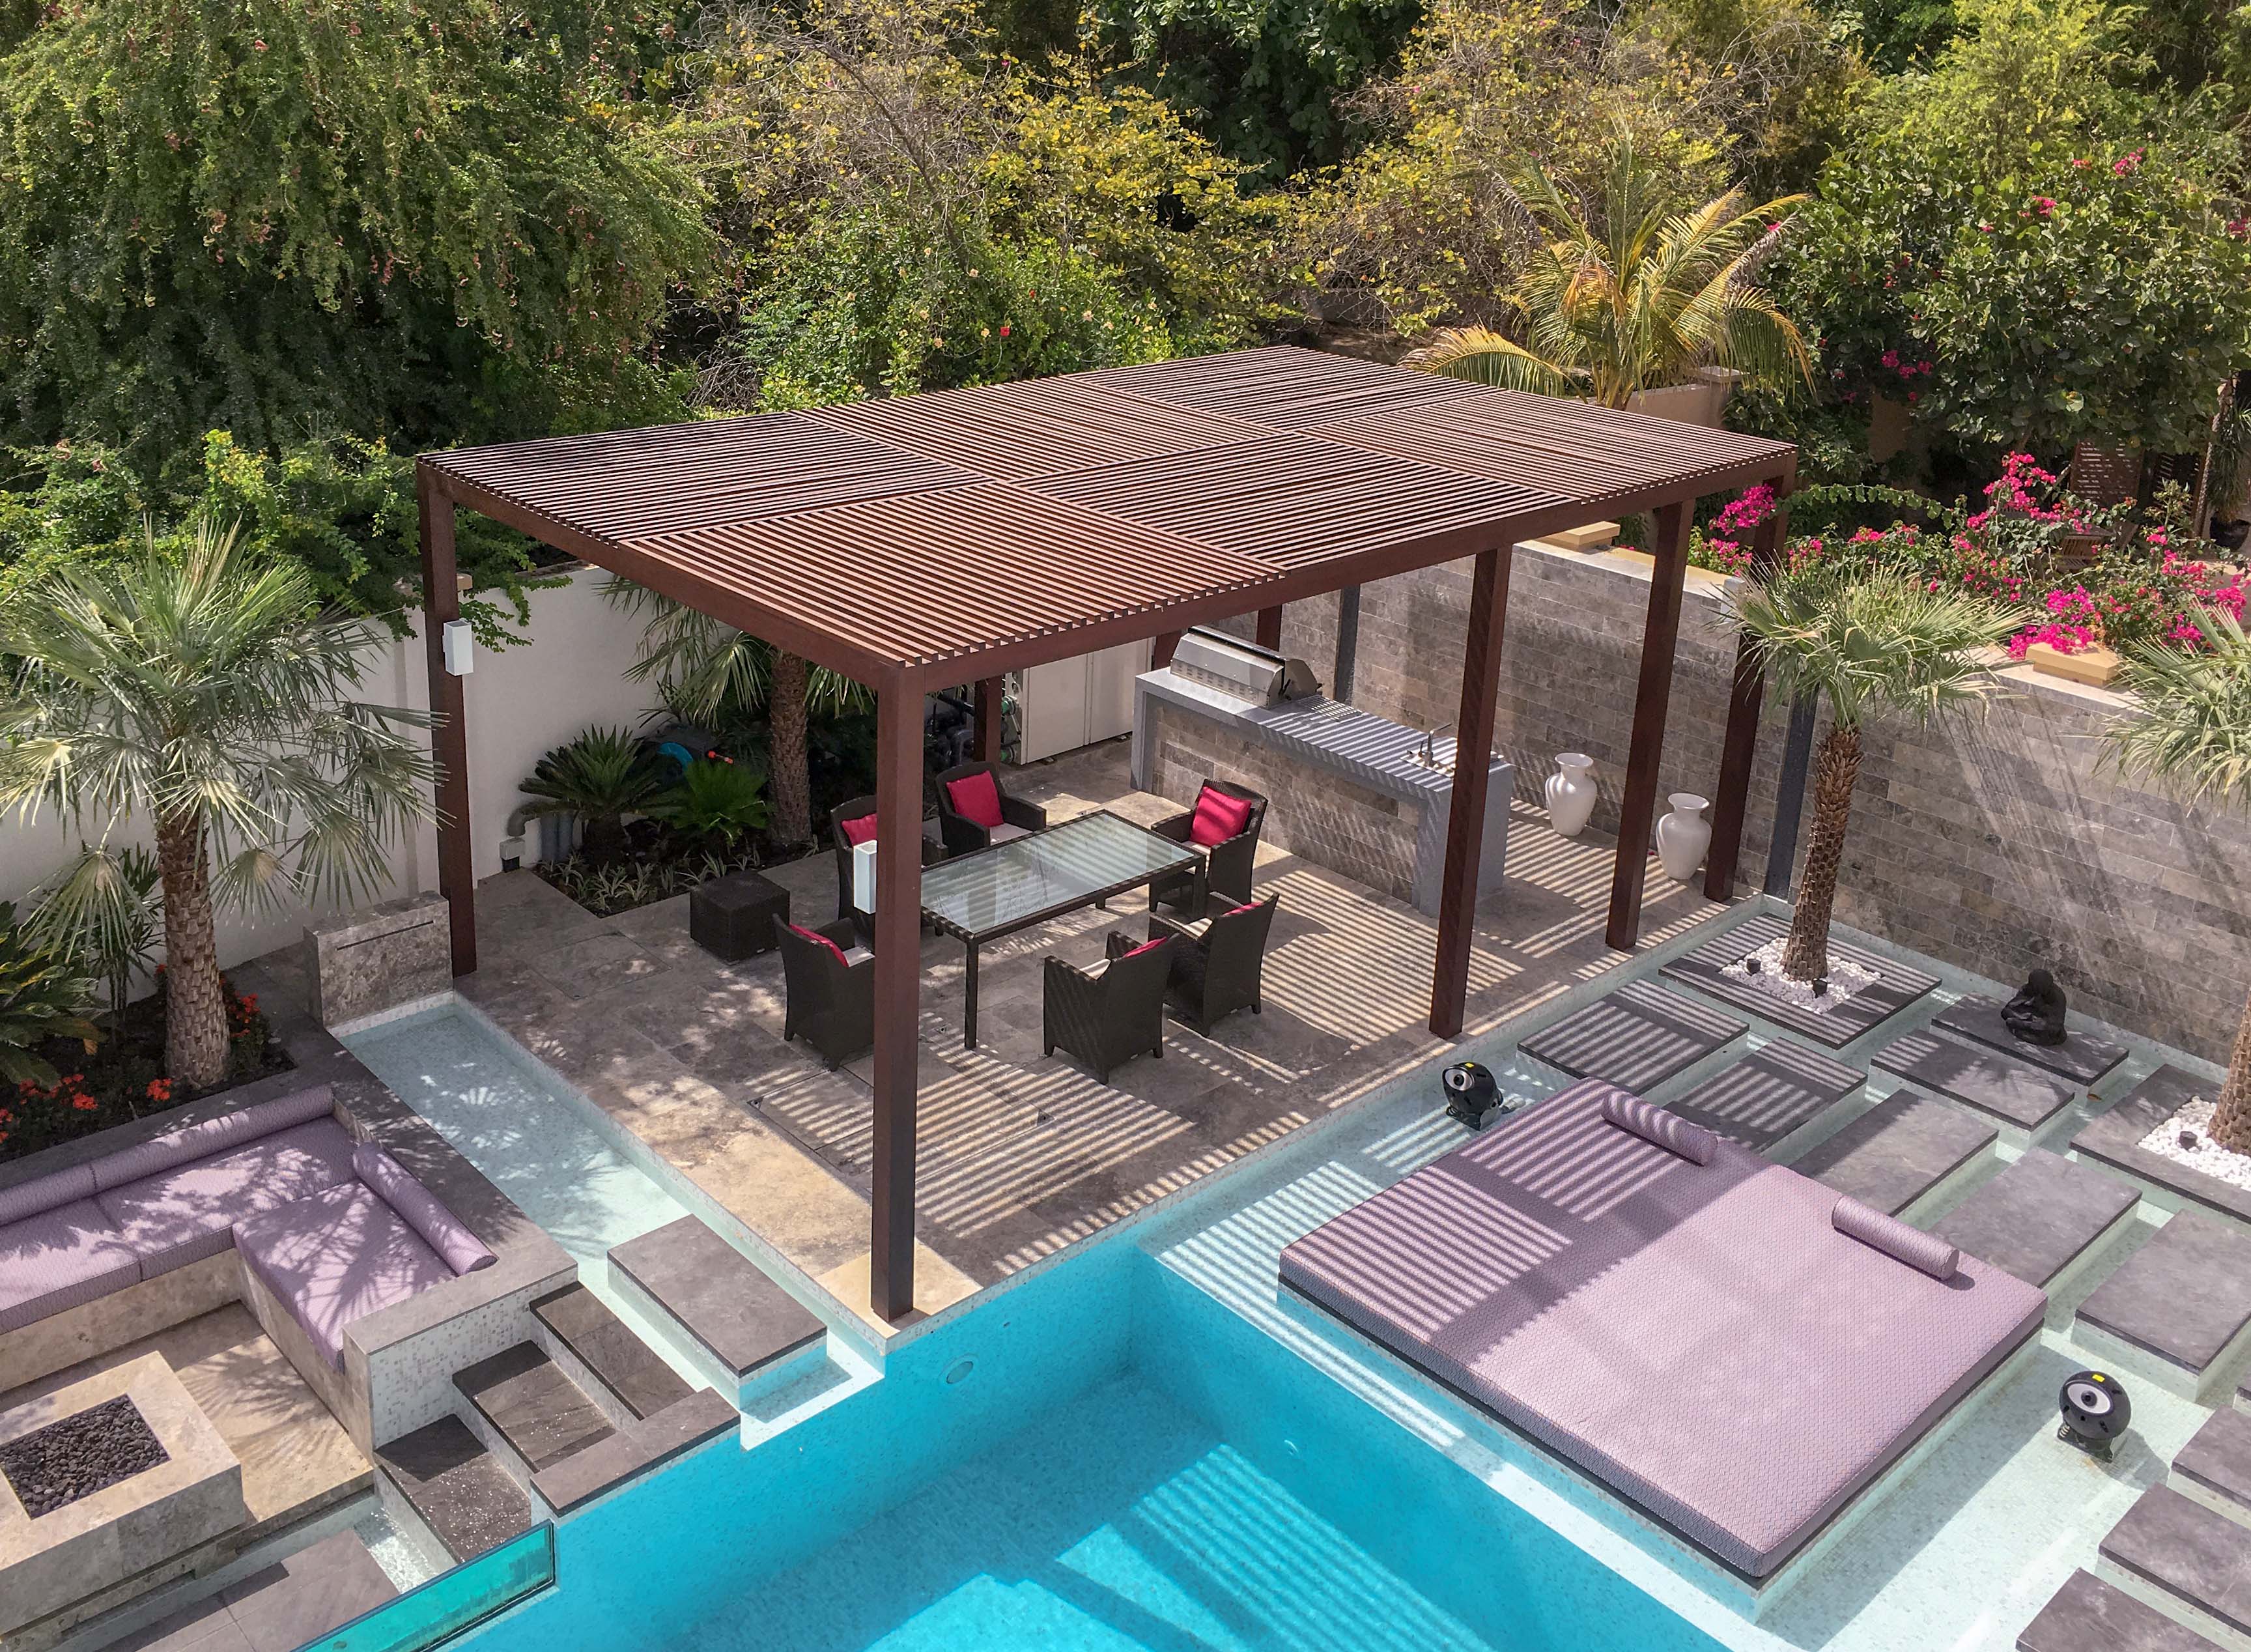 Aqua, Backyard, Composite material, Courtyard, Eco hotel, Garden, Landscaping, Outdoor furniture, Outdoor structure, Outdoor table, Patio, Pergola, Property, Rectangle, Resort, Roof, Shade, Sunlounger, Swimming pool, Teal, Yard